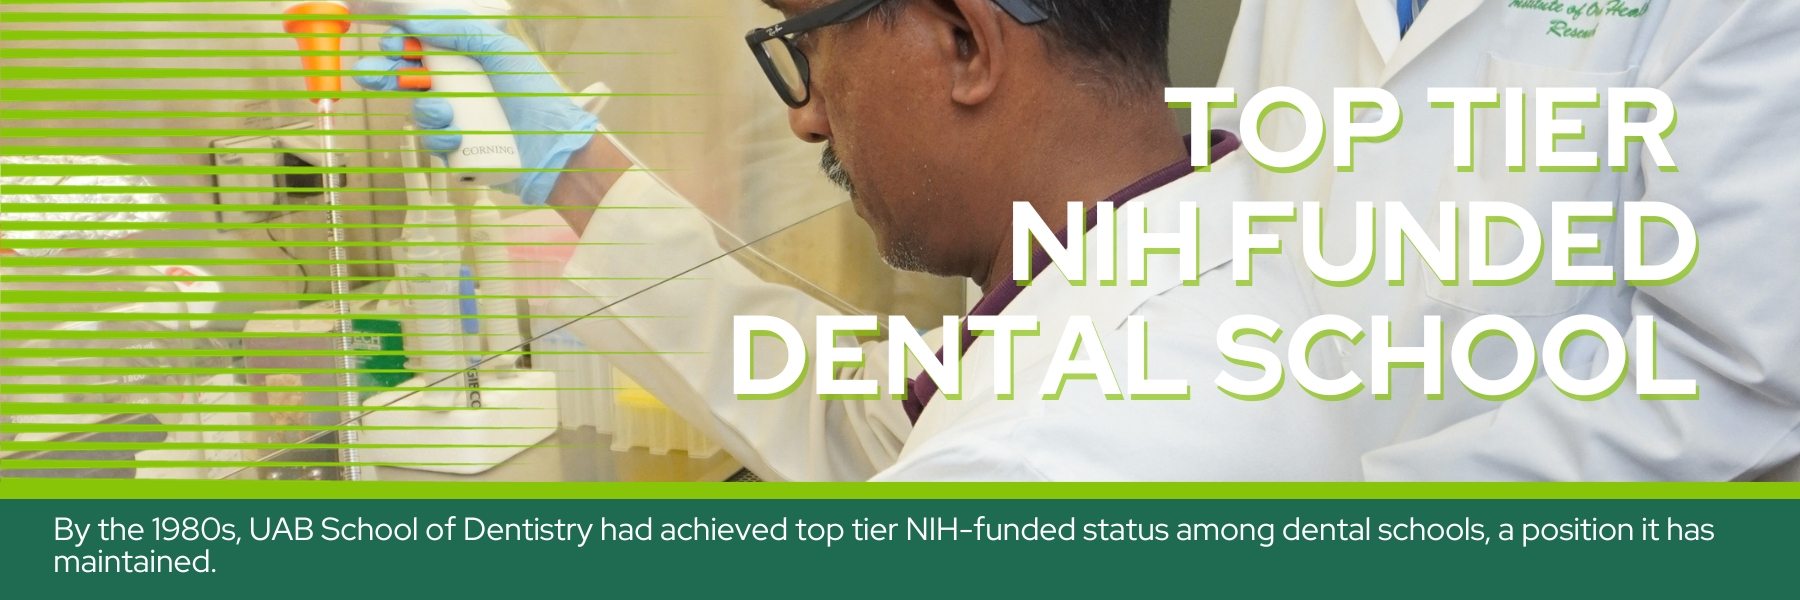 Top tier NIH funded dental school - By the 1980s, UAB School of Dentistry had achieved top tier NIH-funded status among dental schools, a position it has maintained.